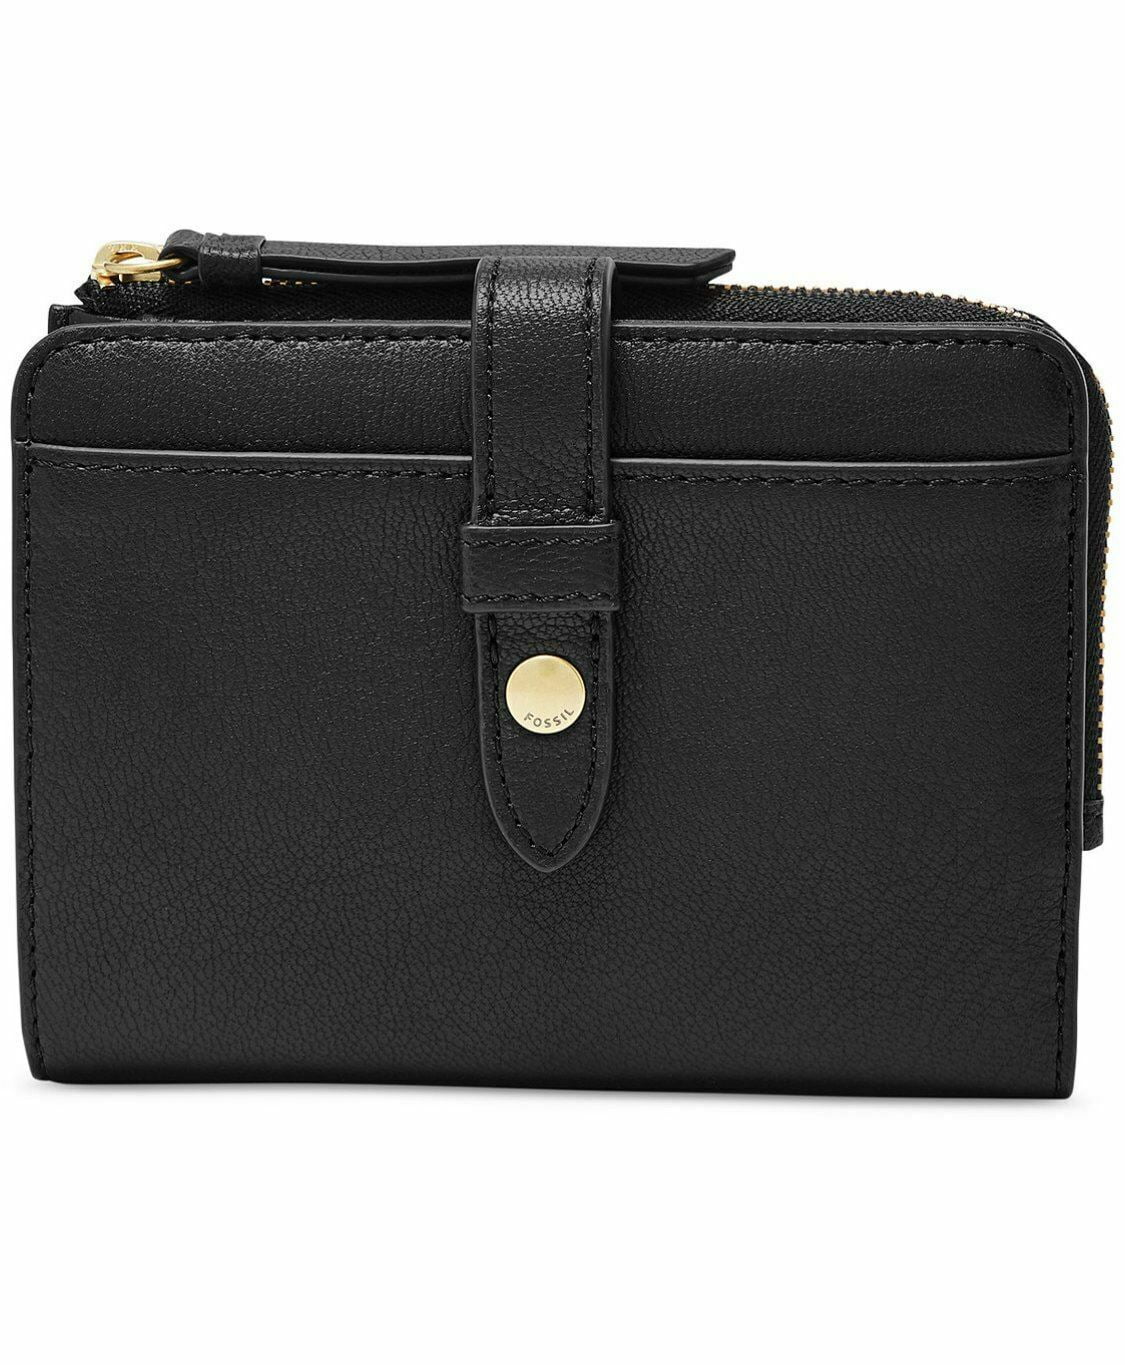 Coin Pouch - SLG1296656 - Fossil